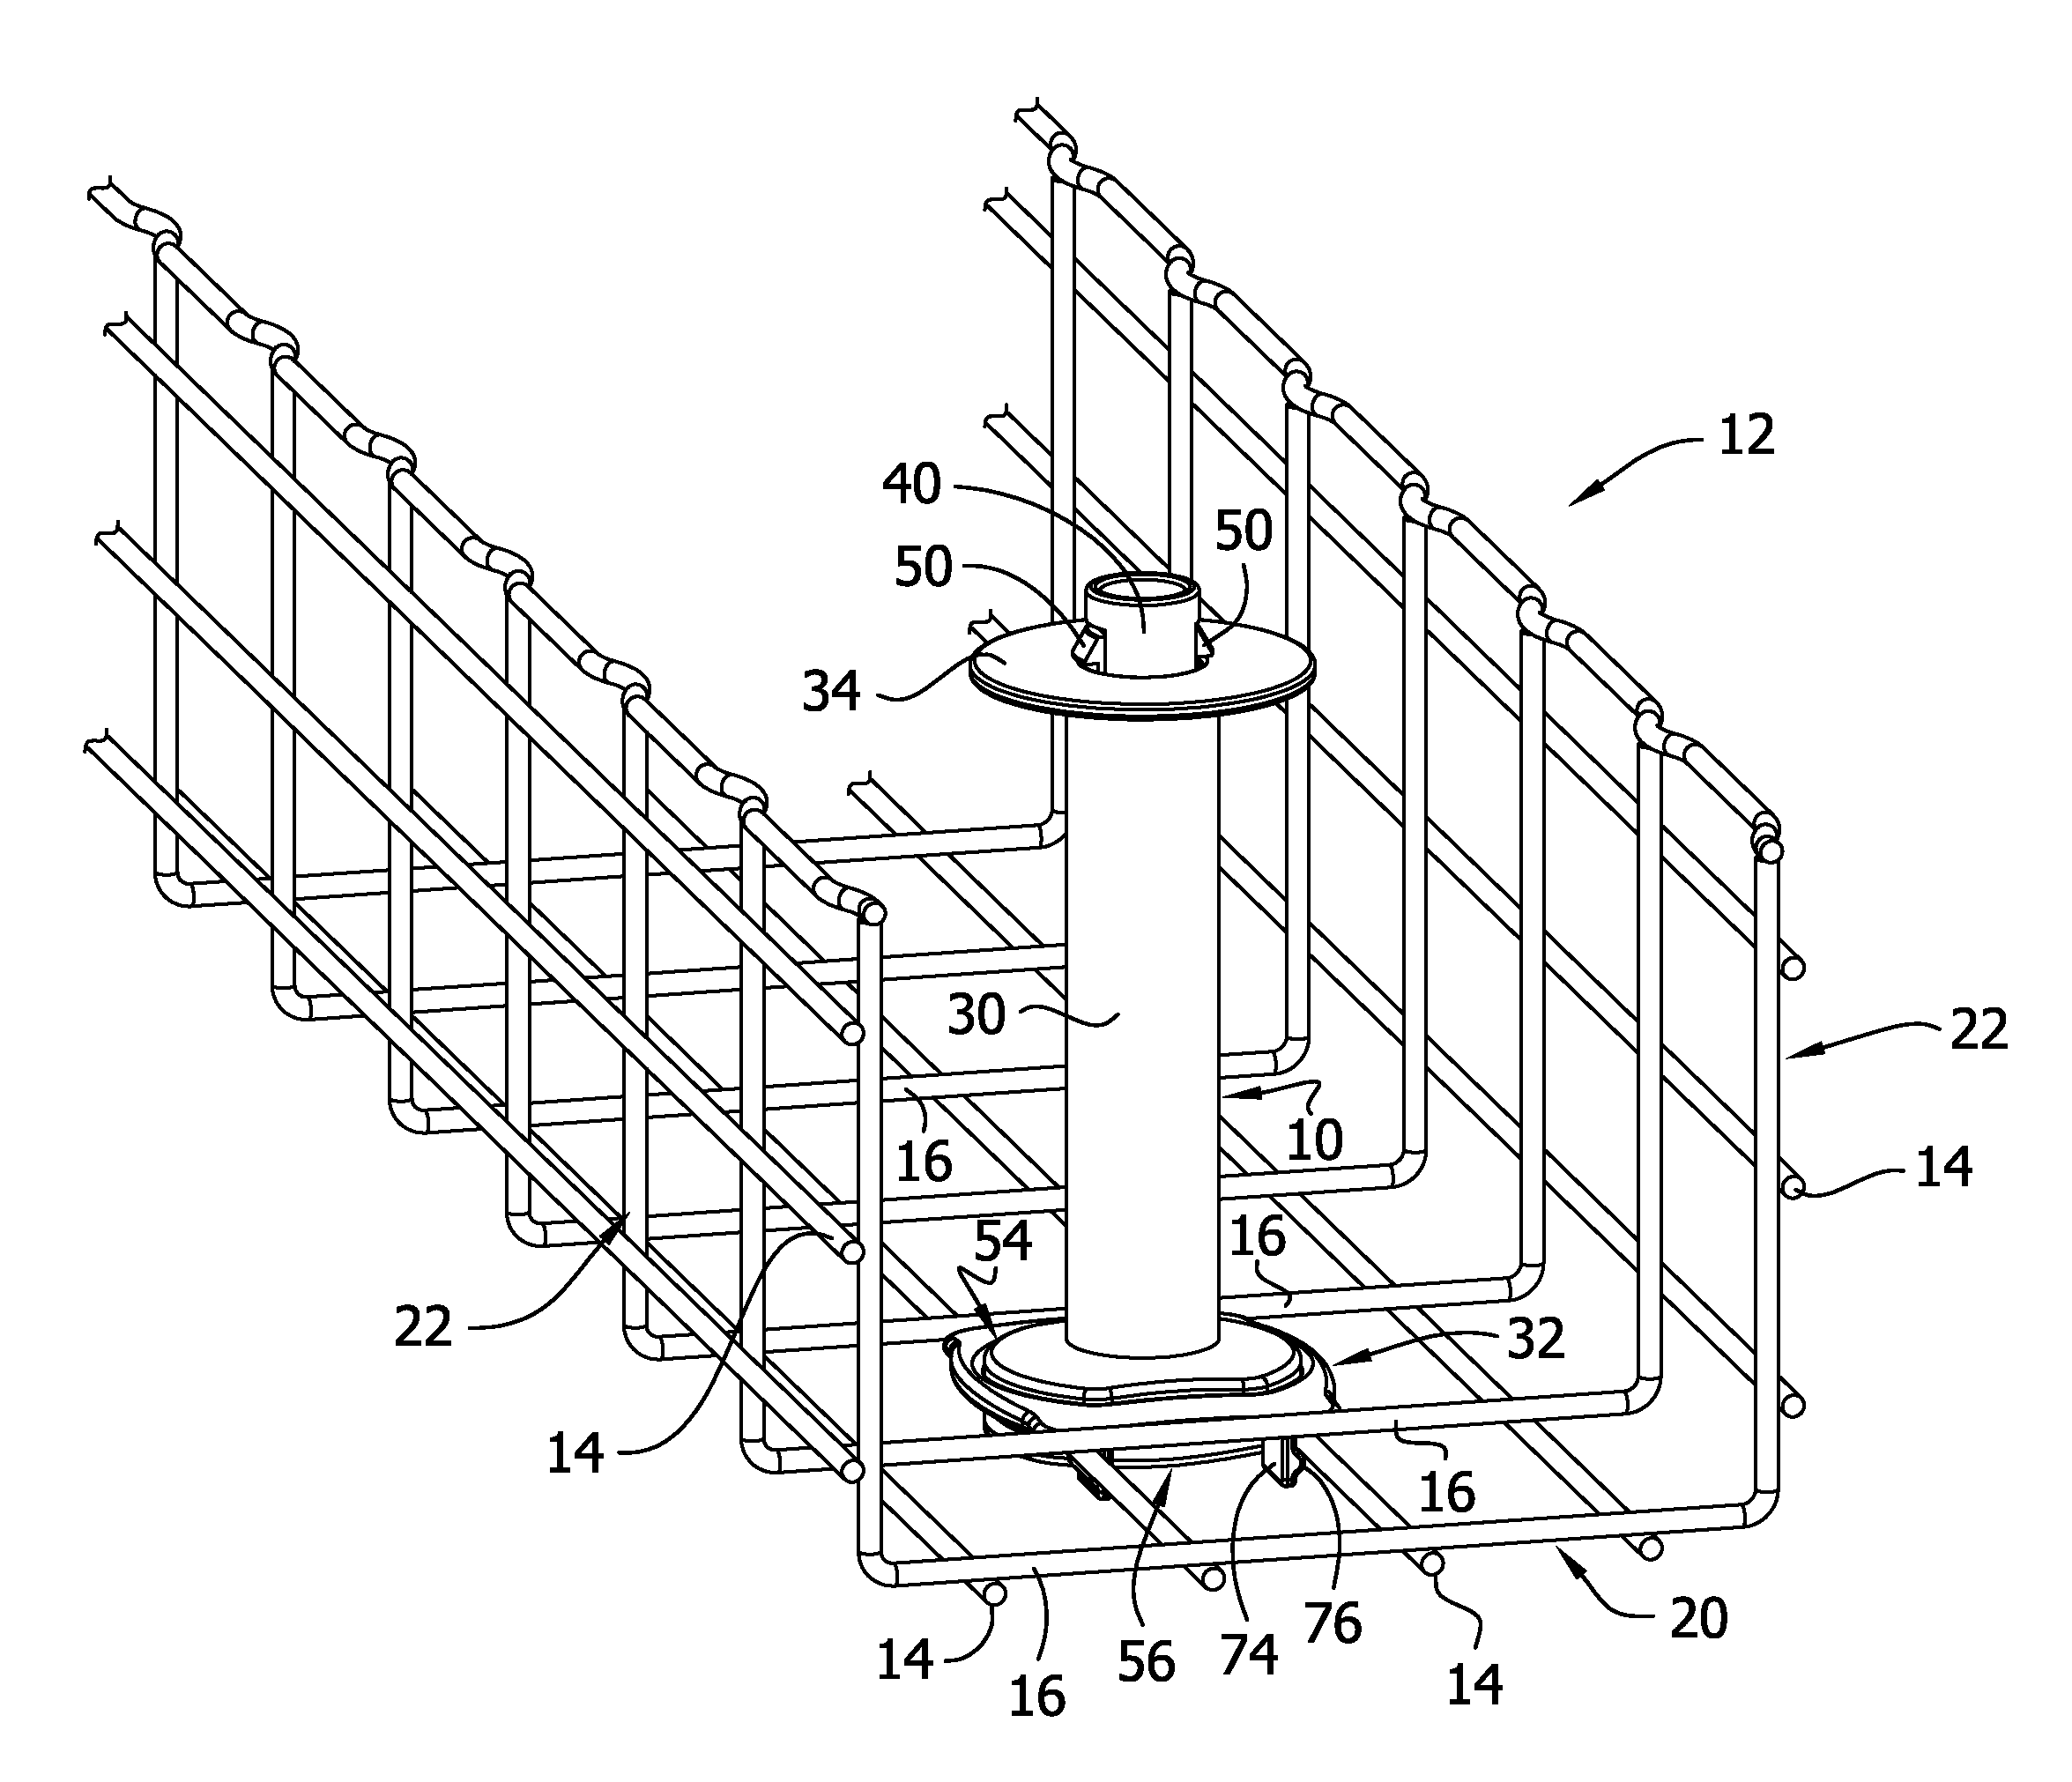 Cable guide for wire basket cable tray